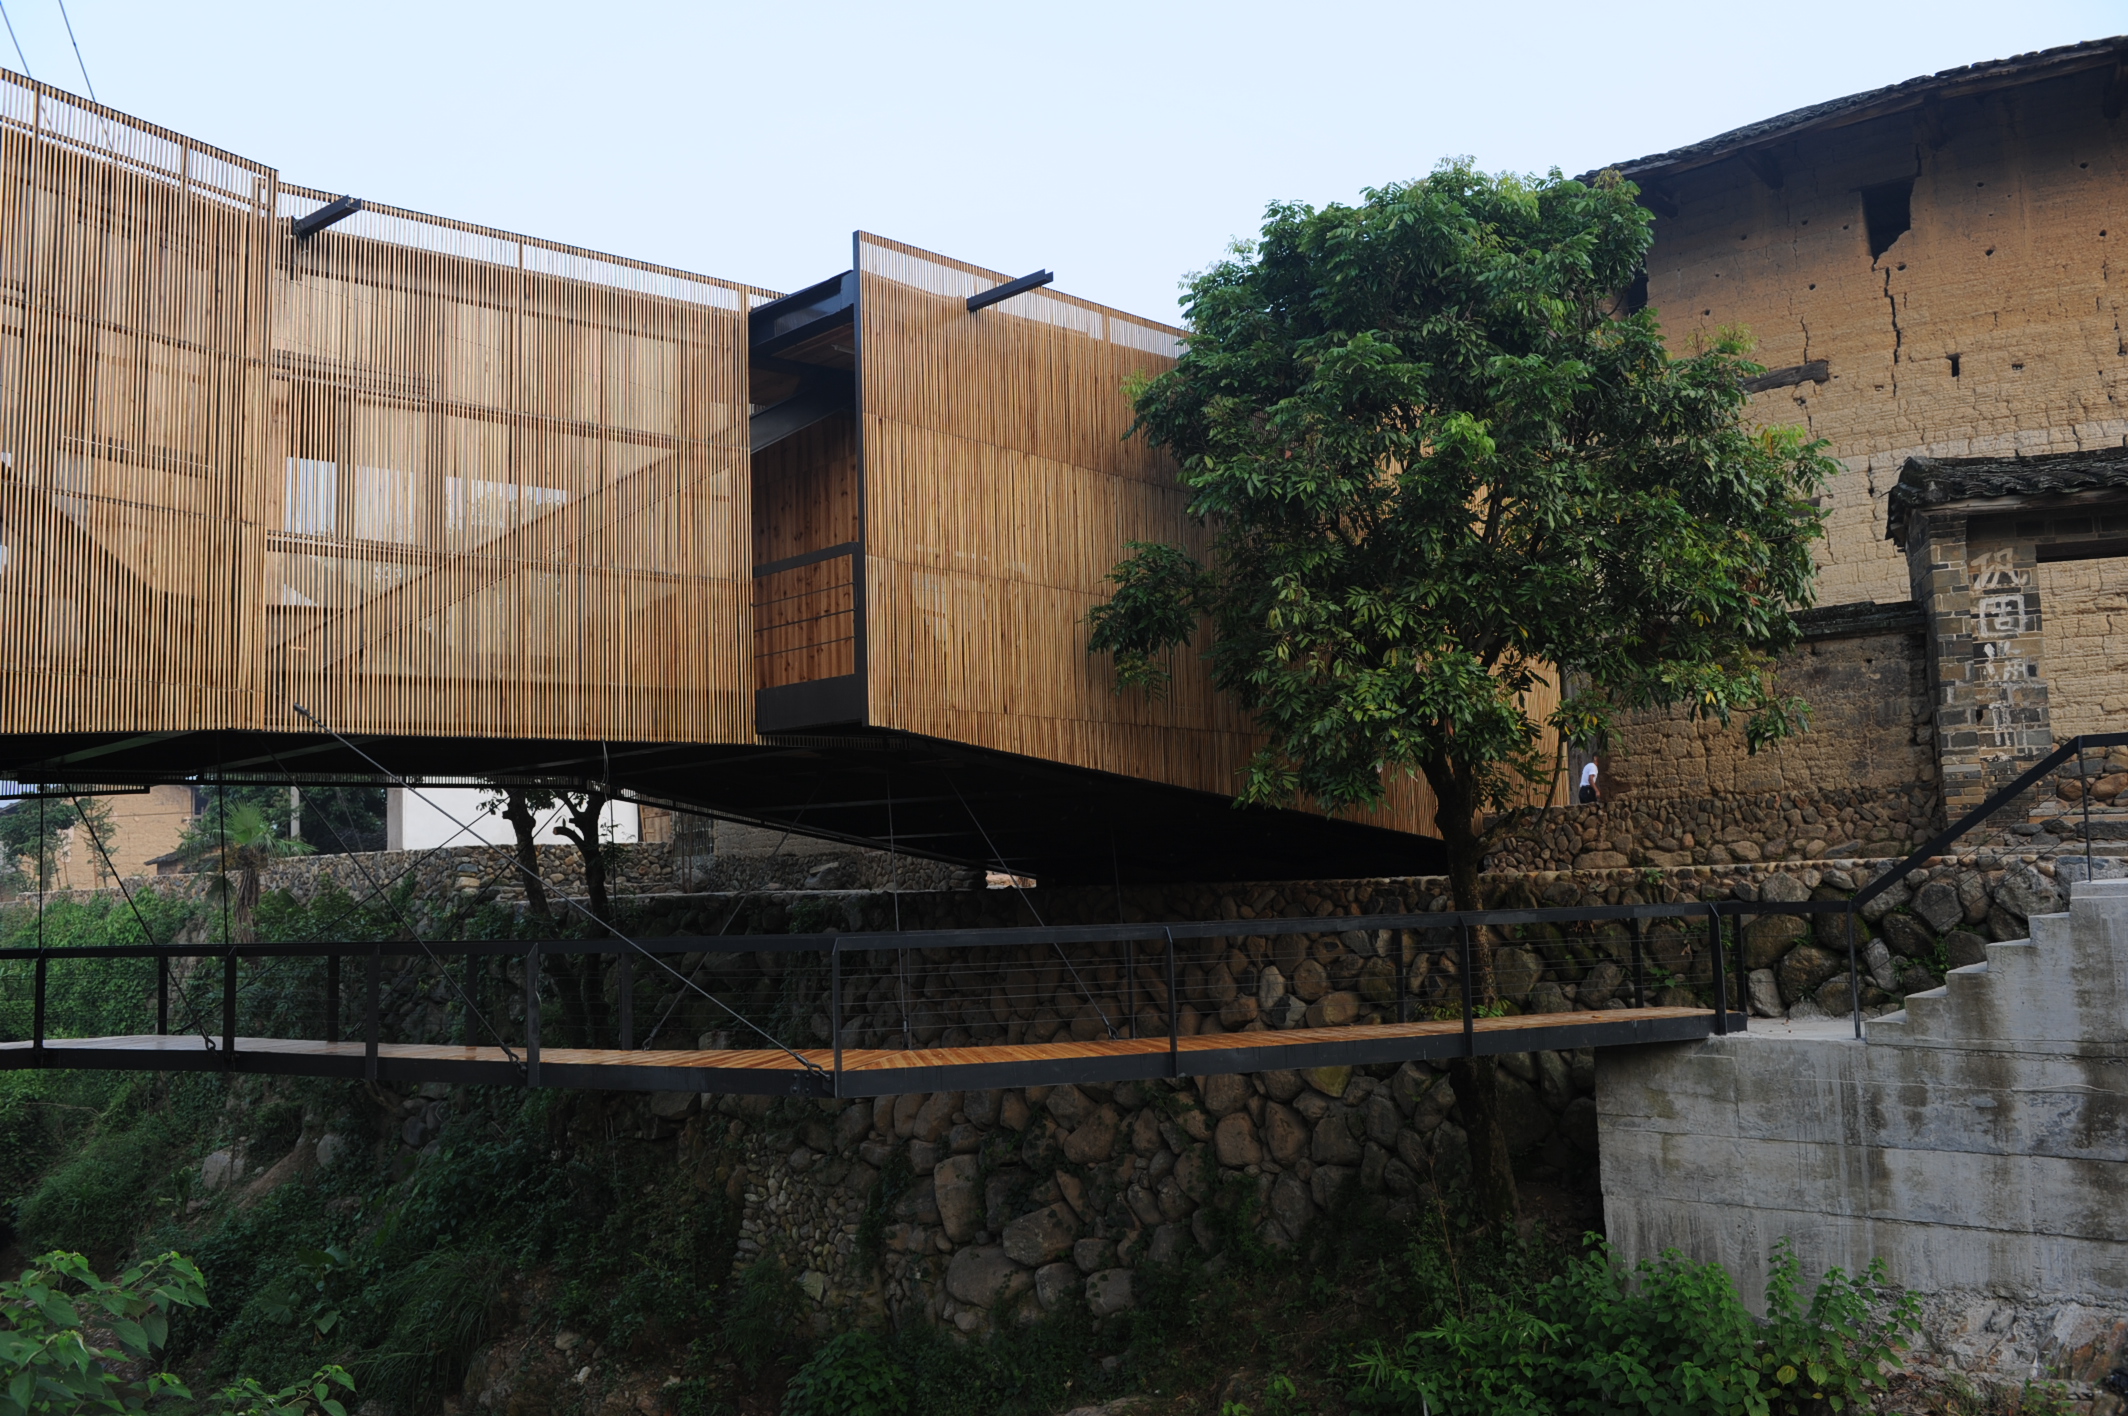 The Bridge School in the Fujian province of China connects two parts of a village separated by a river, and achieves unity in many other ways. Photo: Aga Khan Award for Architecture / Li Xiaodong